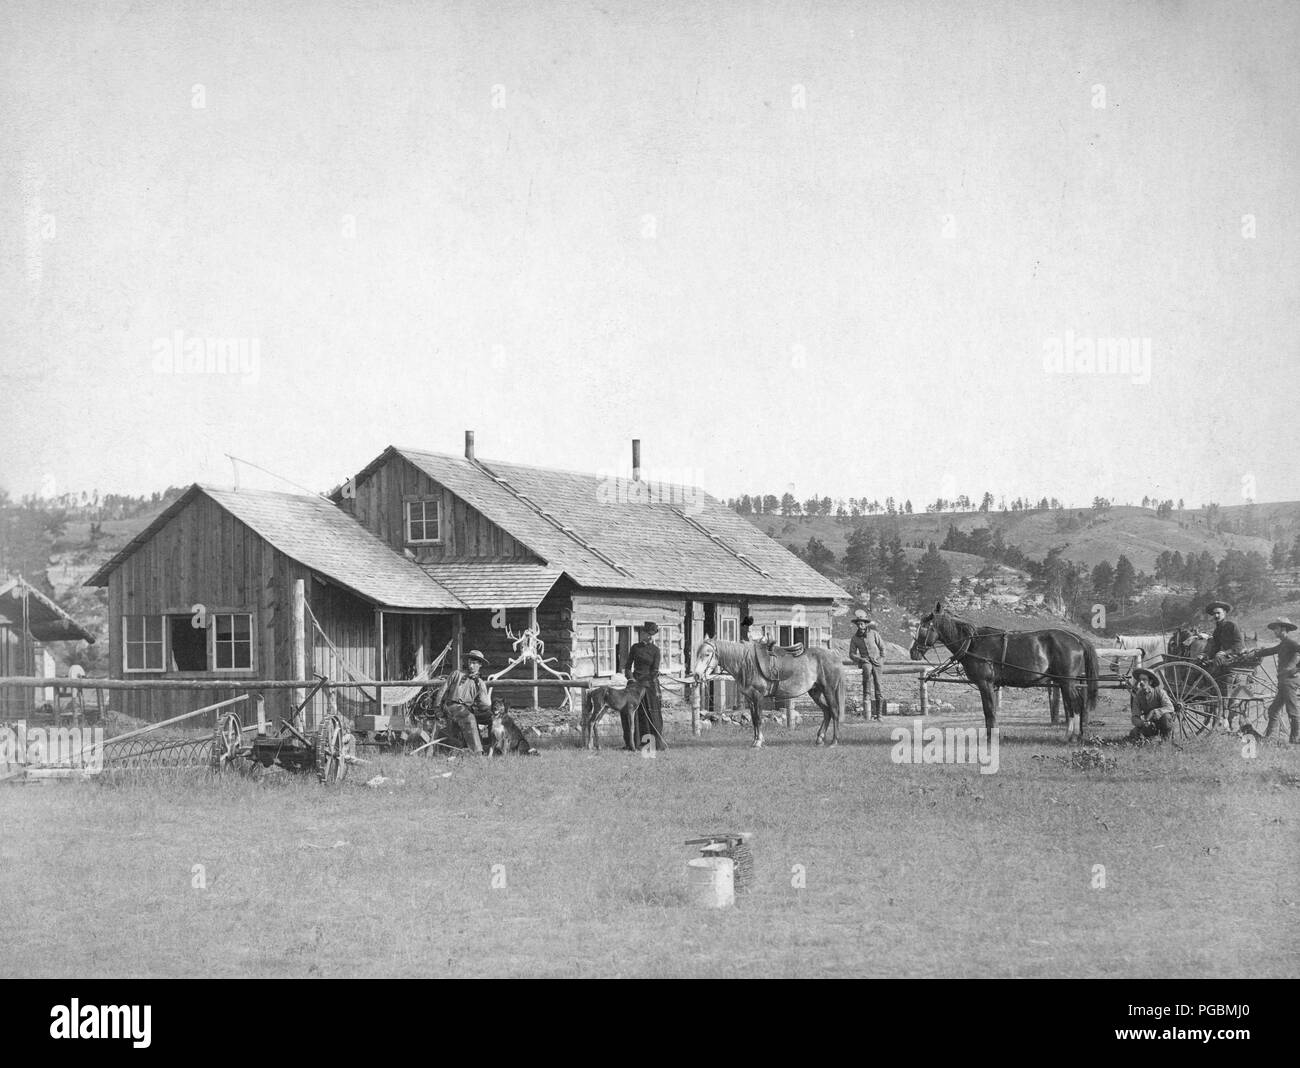 Farm equipment, horses, wagons, dogs, cowboys and others posed in front of western ranch houses Stock Photo